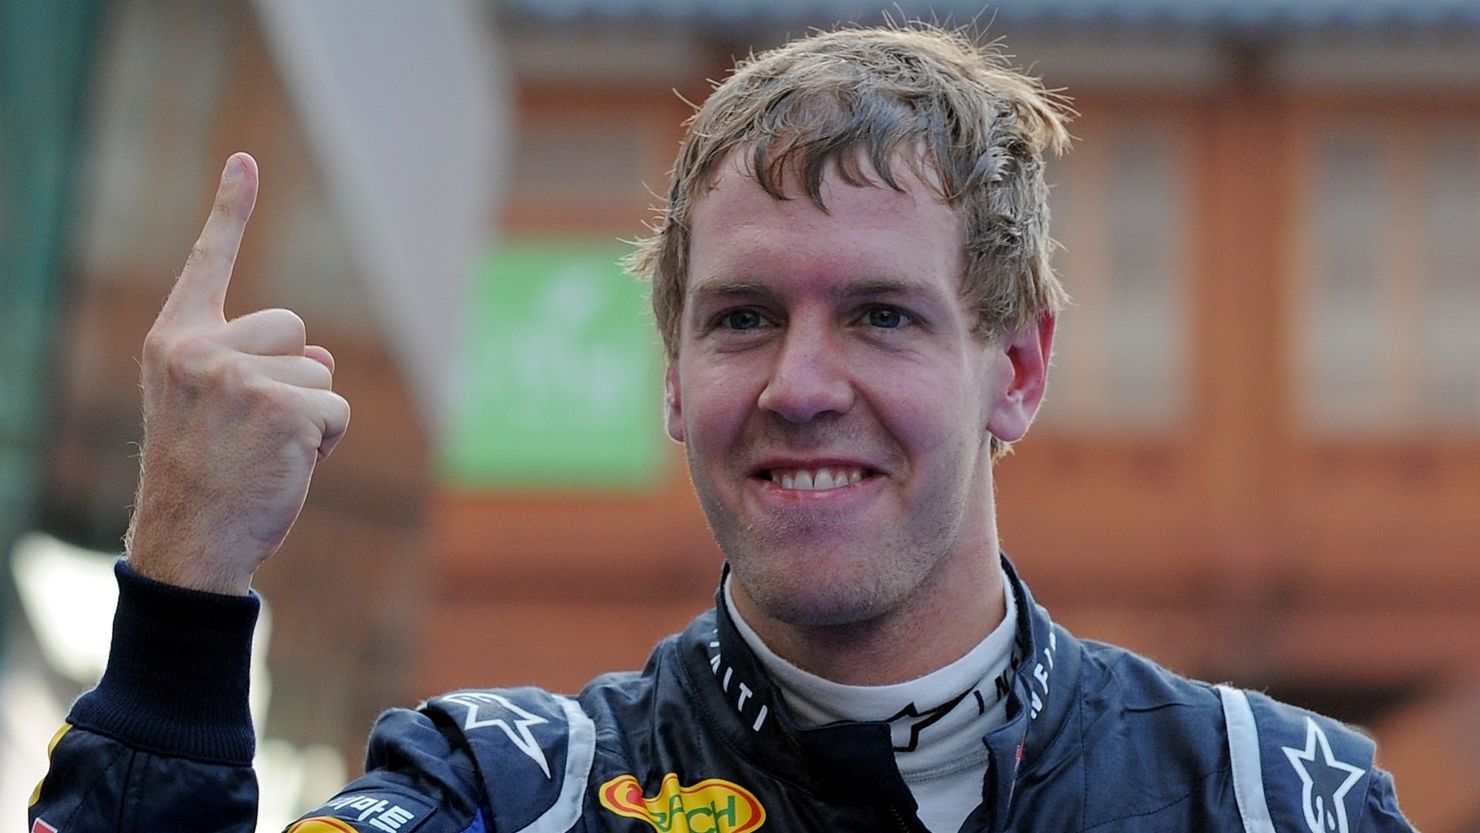 Red Bull's Sebastian Vettel appears to be closing in on his third straight F1 drivers' championship crown